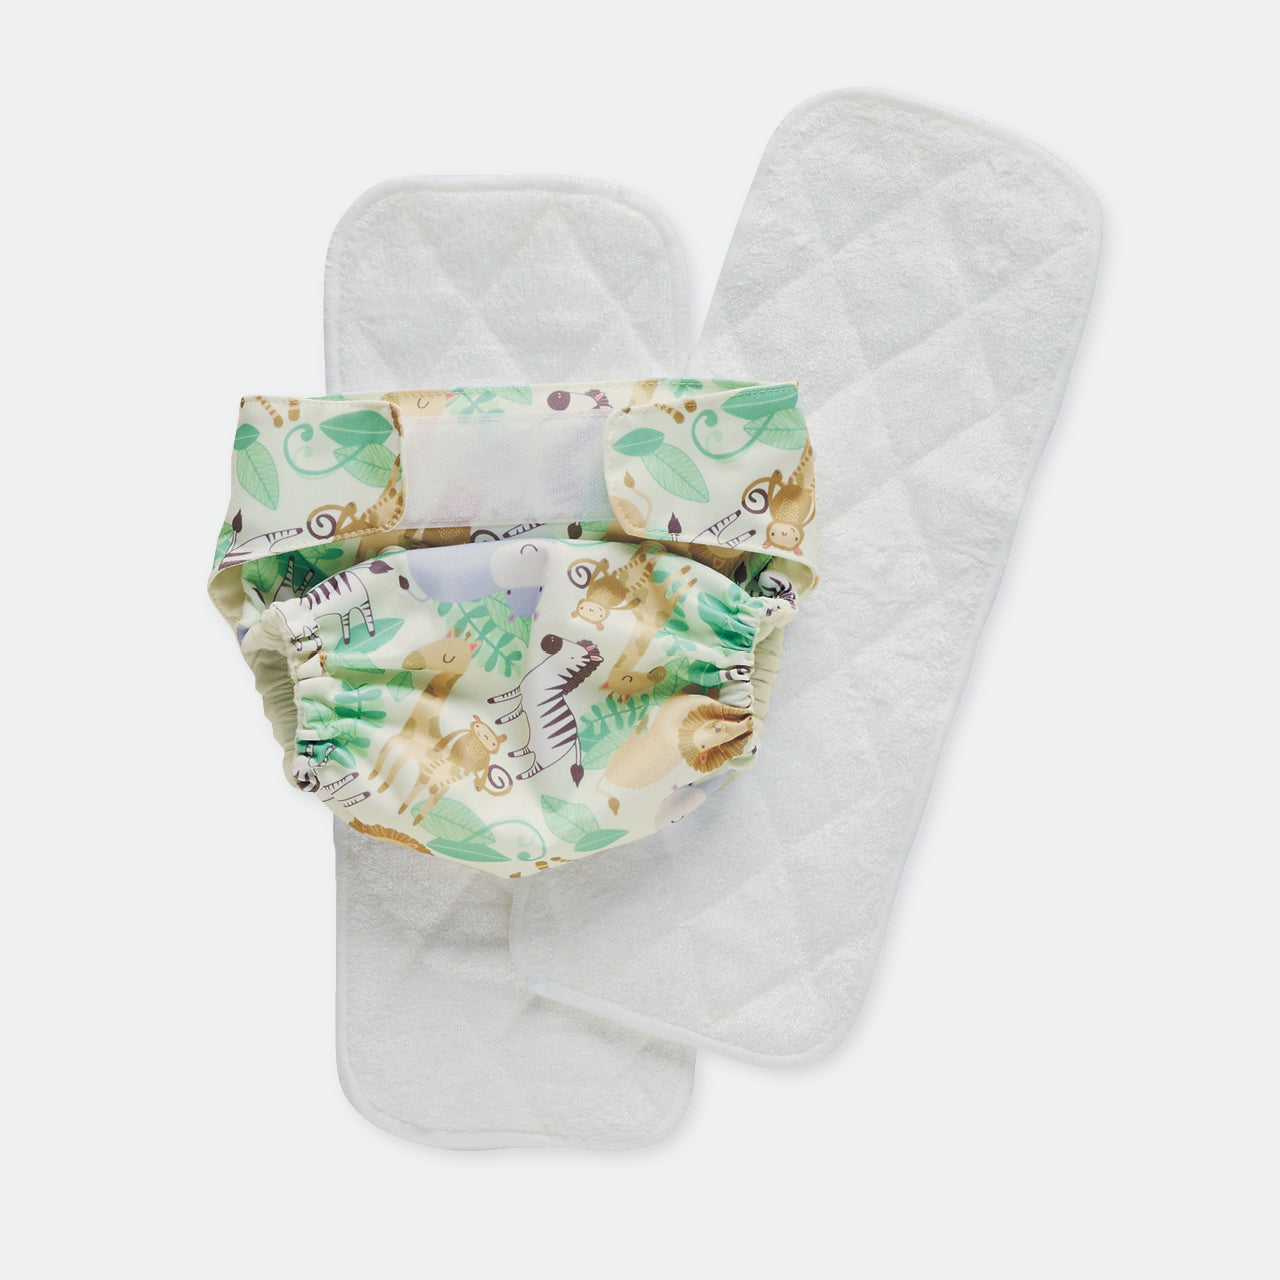 Safari Reusable Nappy and liners on a white background